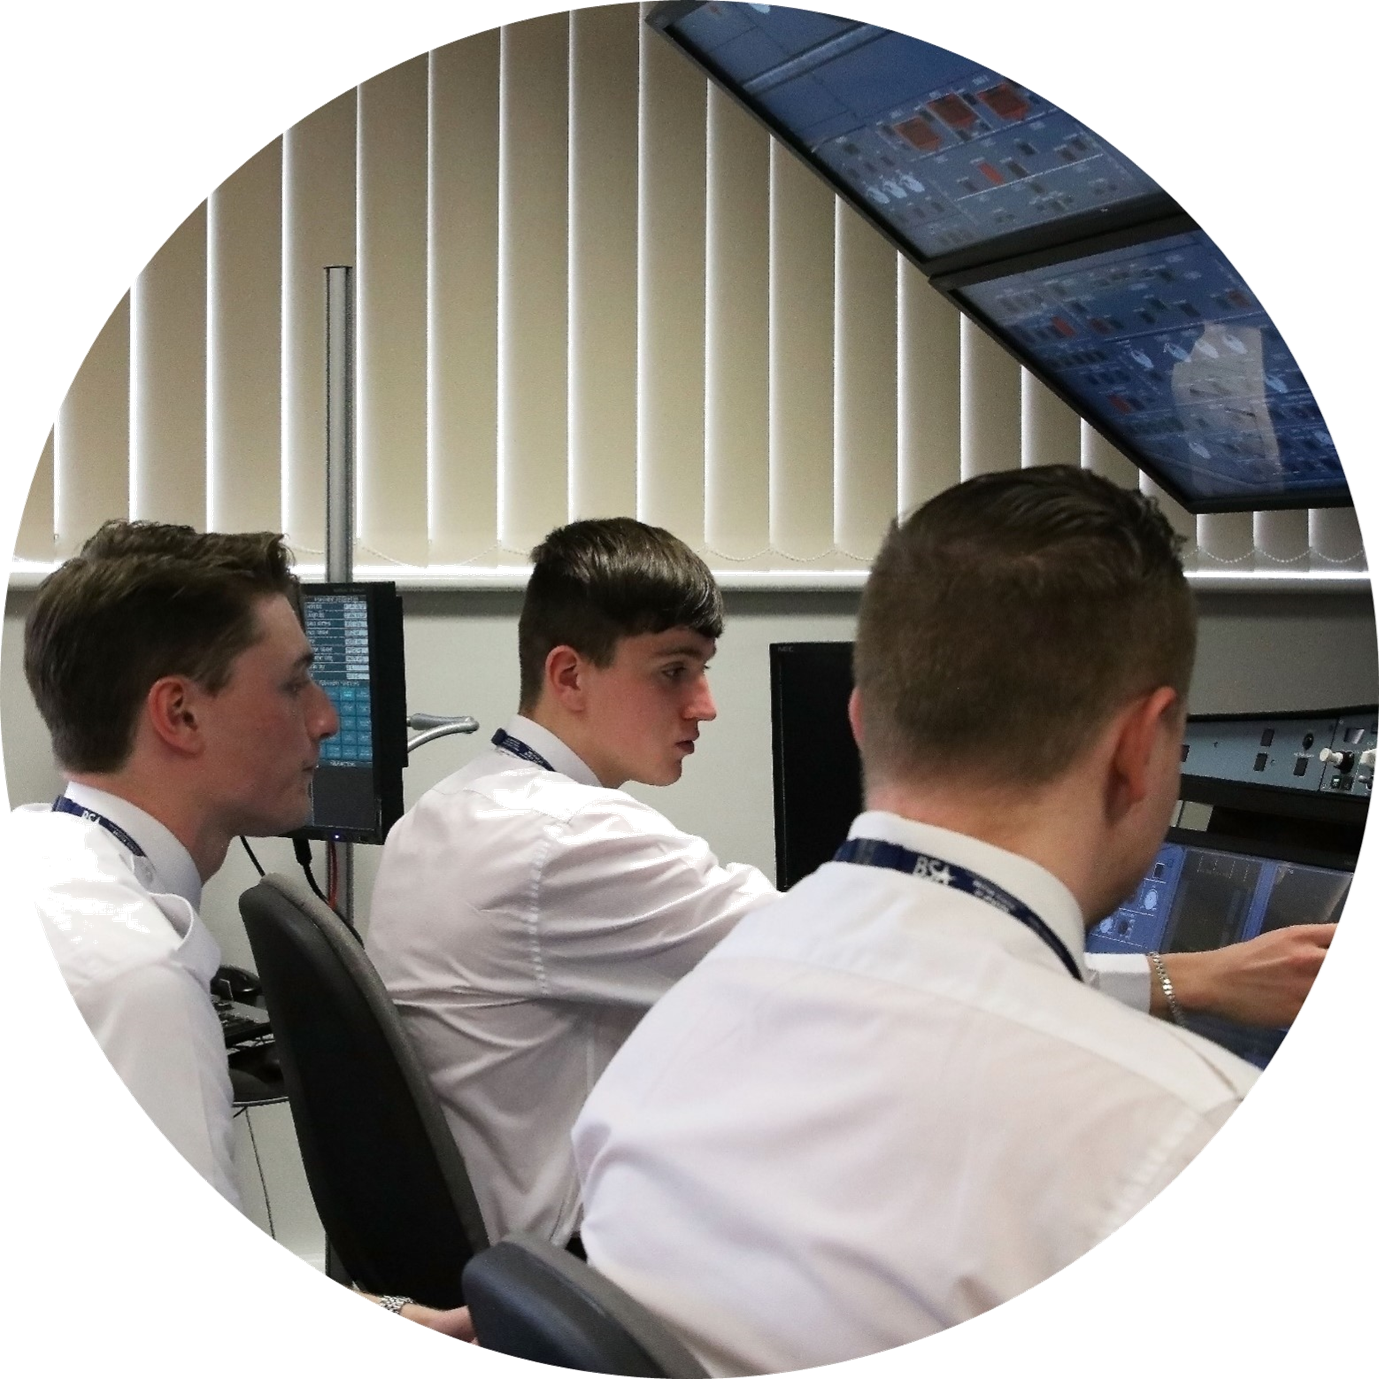 group of learners at an aircraft simulator